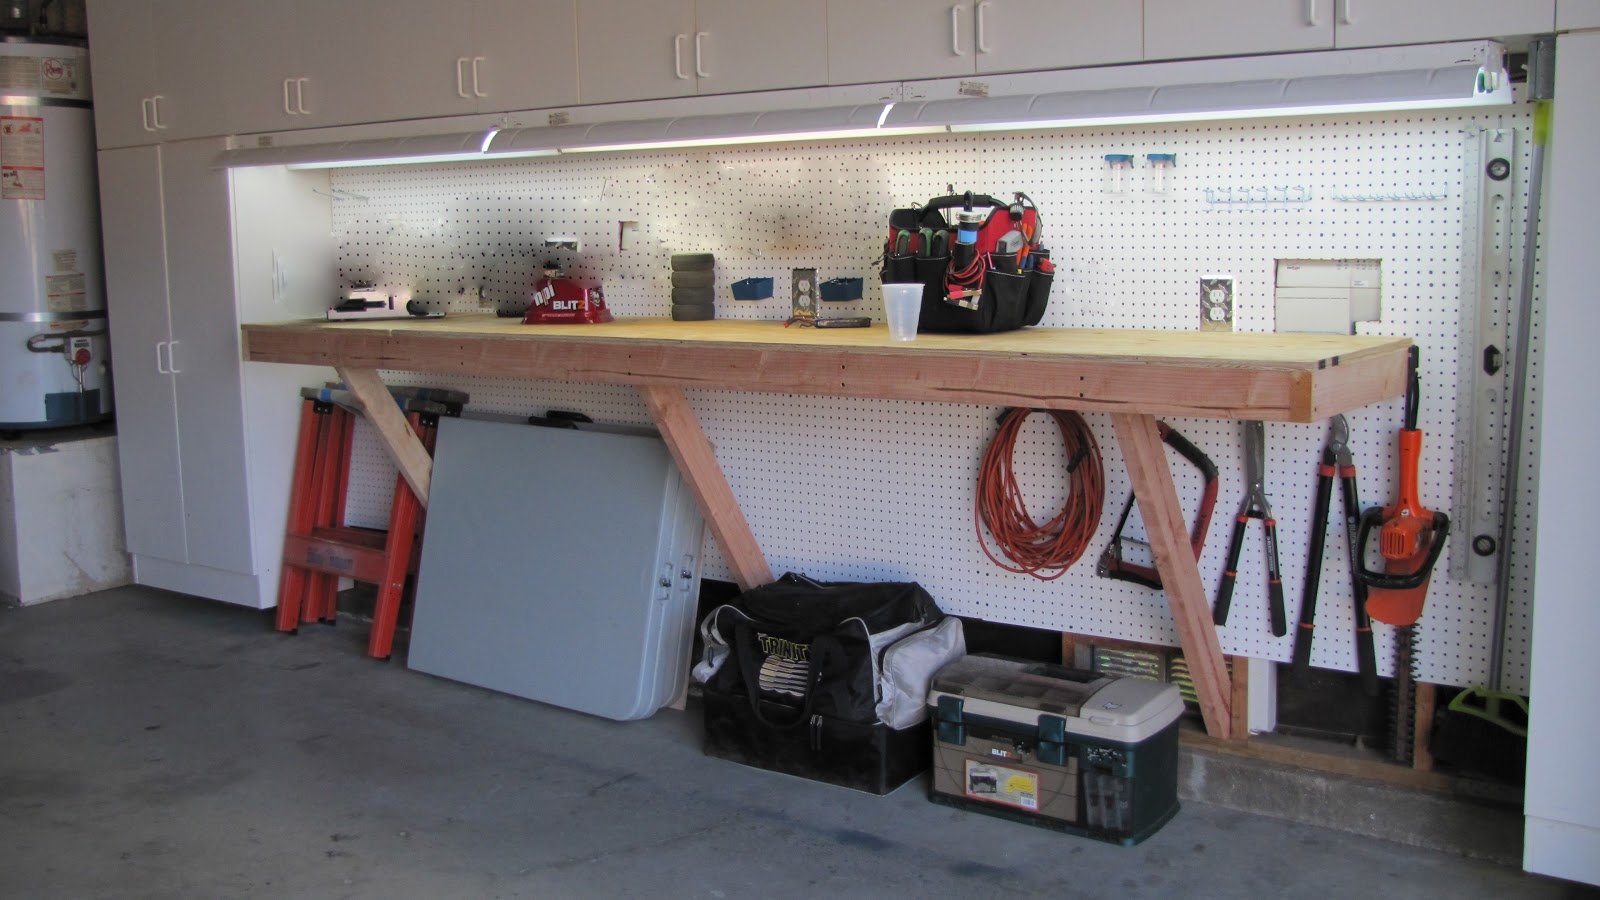 still working on getting the garage organized - there's a lot to ...